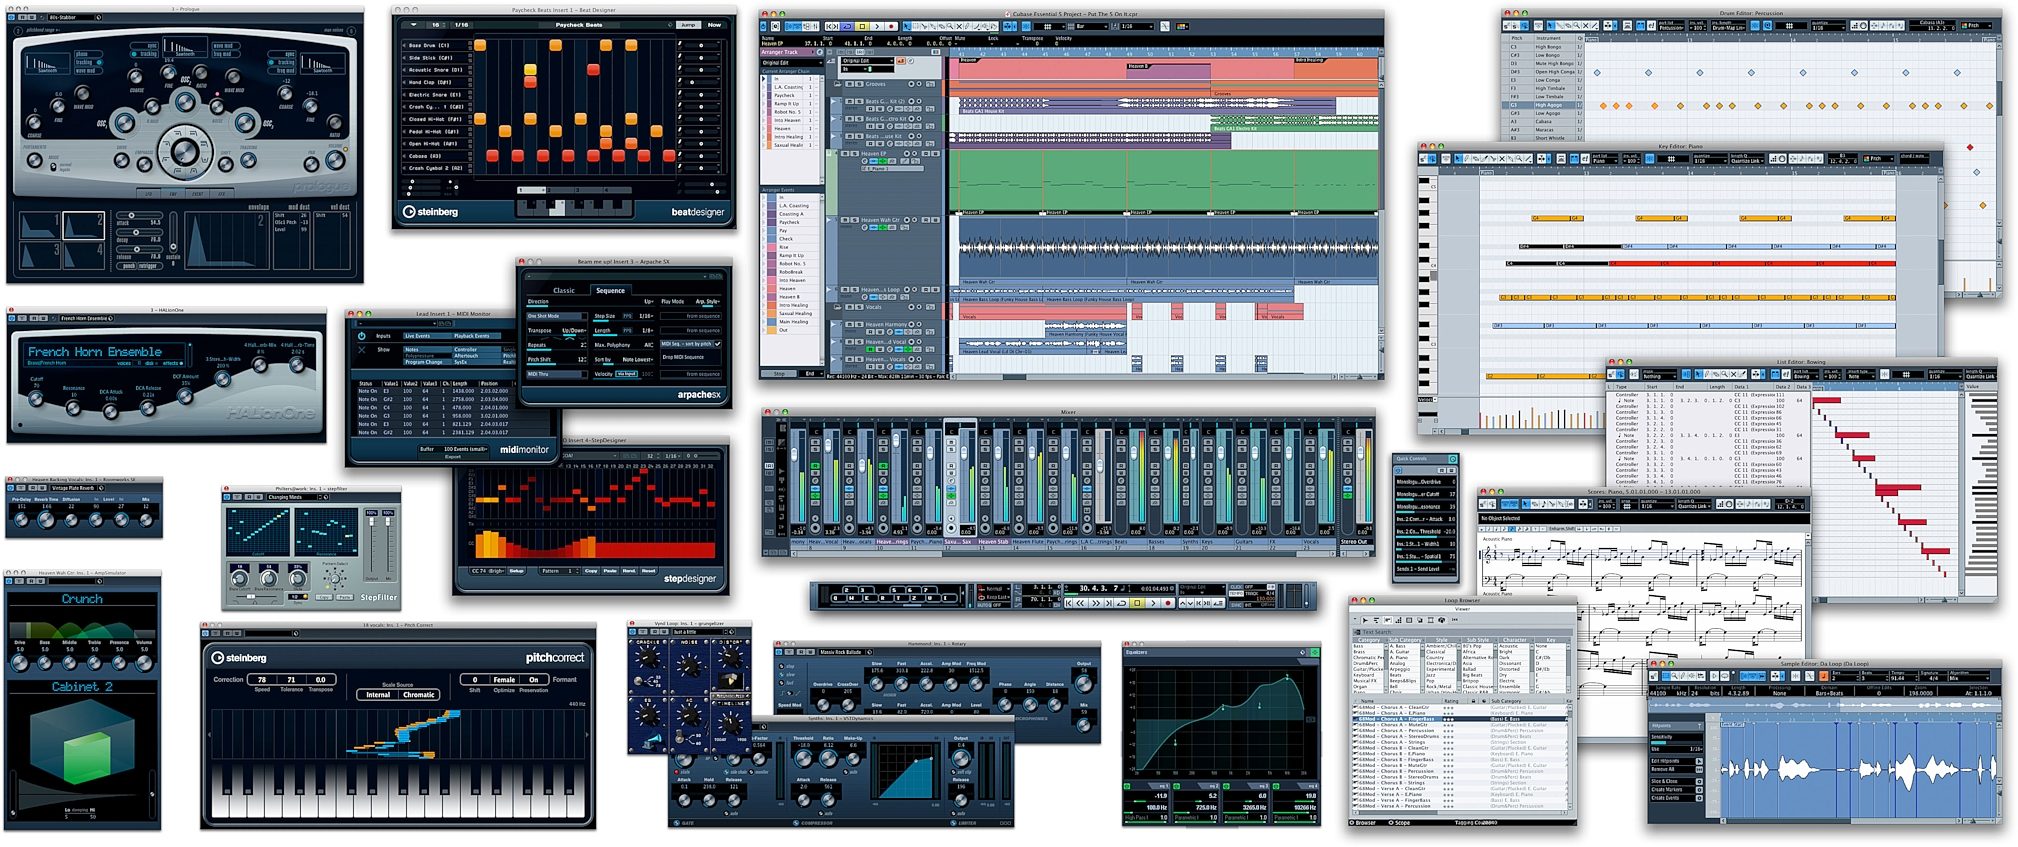 Steinberg Cubase 5 Essential Software zZounds